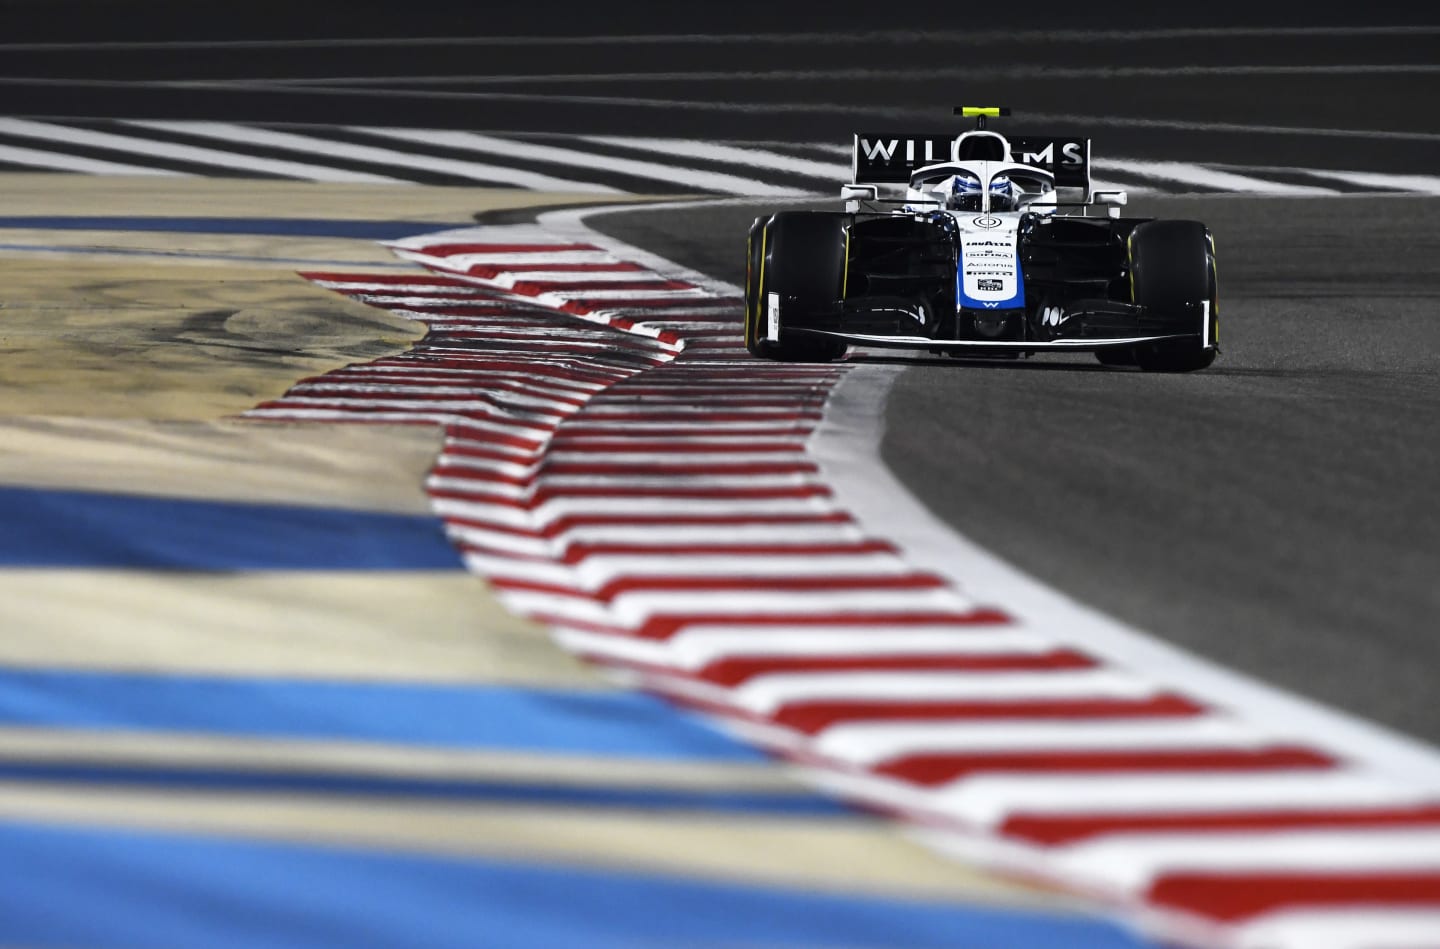 BAHRAIN, BAHRAIN - NOVEMBER 29: Nicholas Latifi of Canada driving the (6) Williams Racing FW43 Mercedes on track during the F1 Grand Prix of Bahrain at Bahrain International Circuit on November 29, 2020 in Bahrain, Bahrain. (Photo by Rudy Carezzevoli/Getty Images)